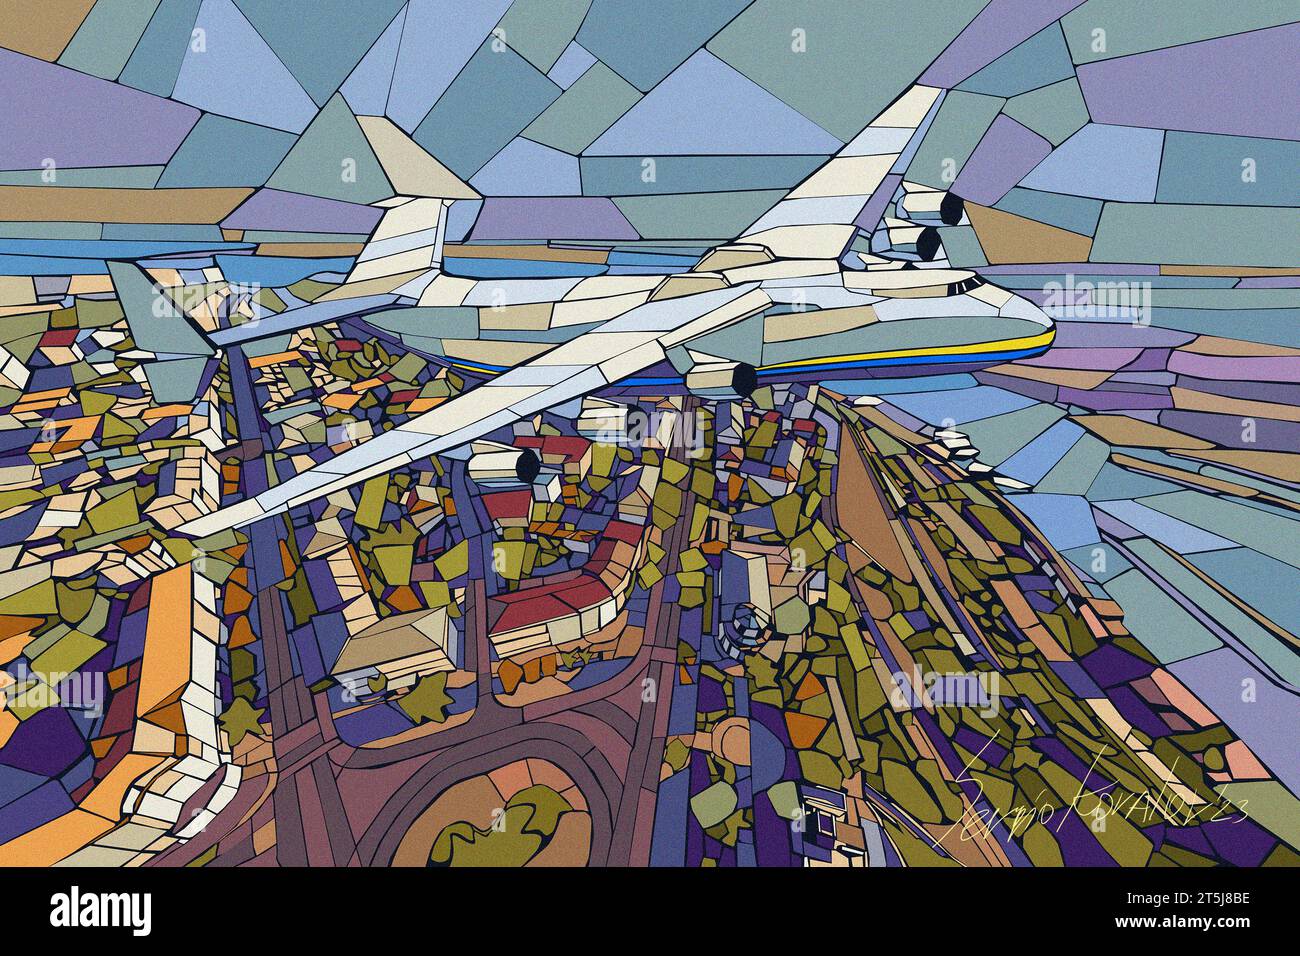 Sevastopol, Ukraine. View in Sevastopol city with plane in the sky. Ukrainian architecture, cargy aircraft, vector graphic, illustration create by art Stock Photo